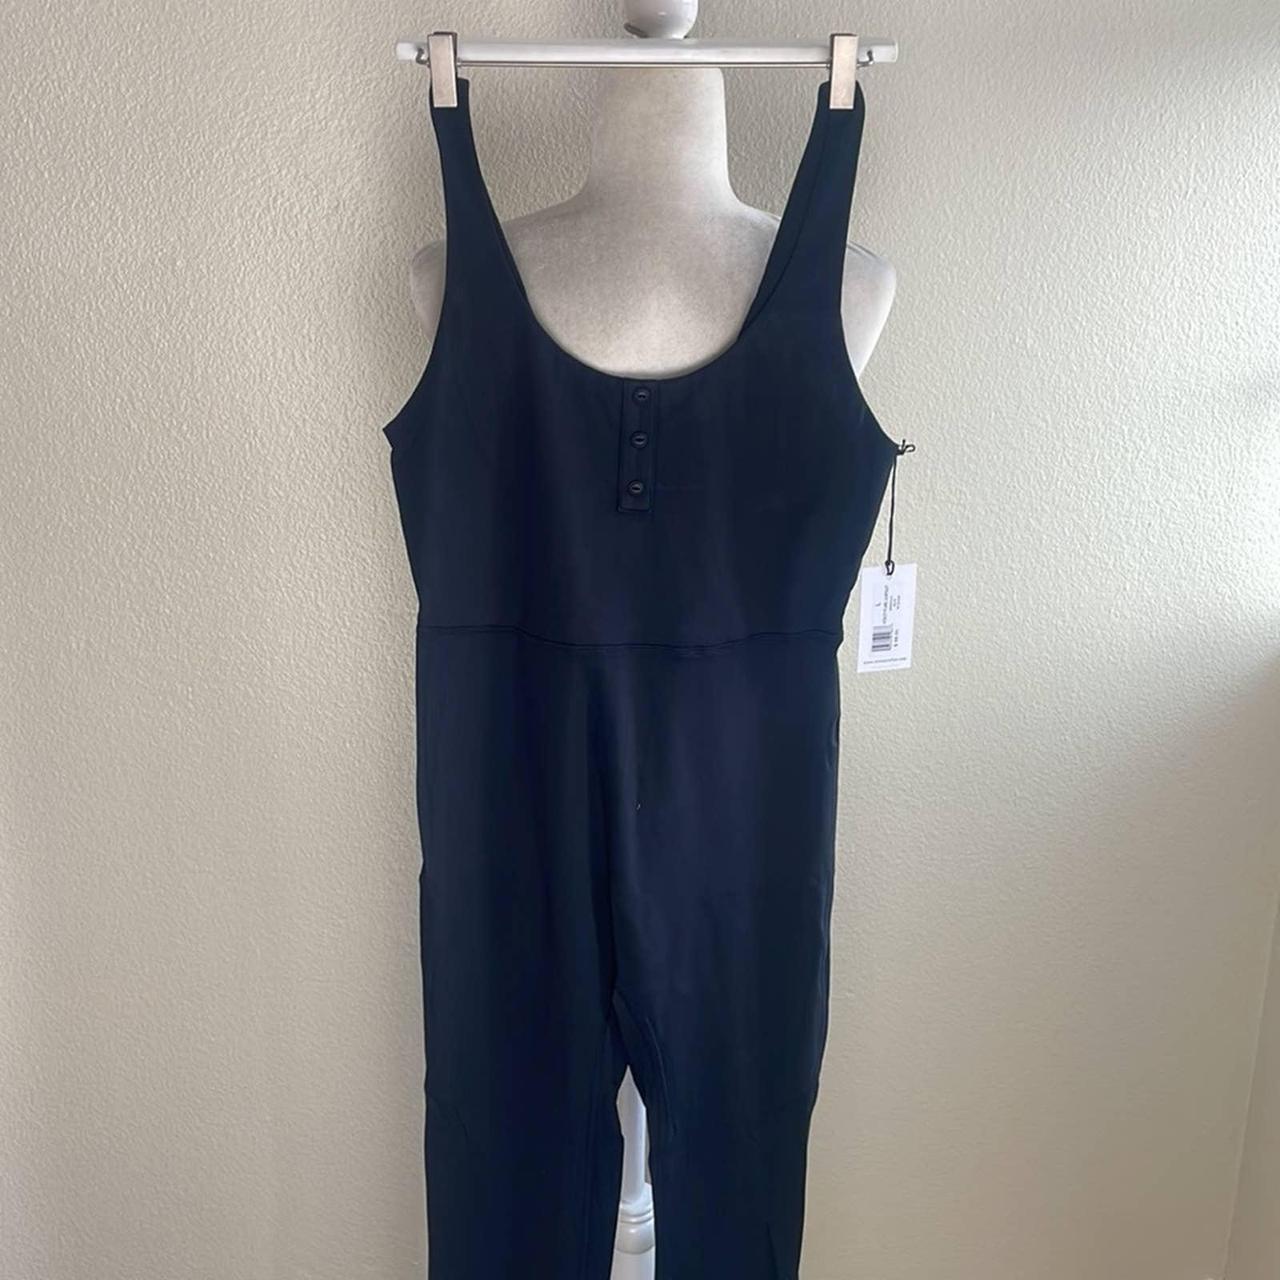 WeWoreWhat Henley Flare Jumpsuit in Black